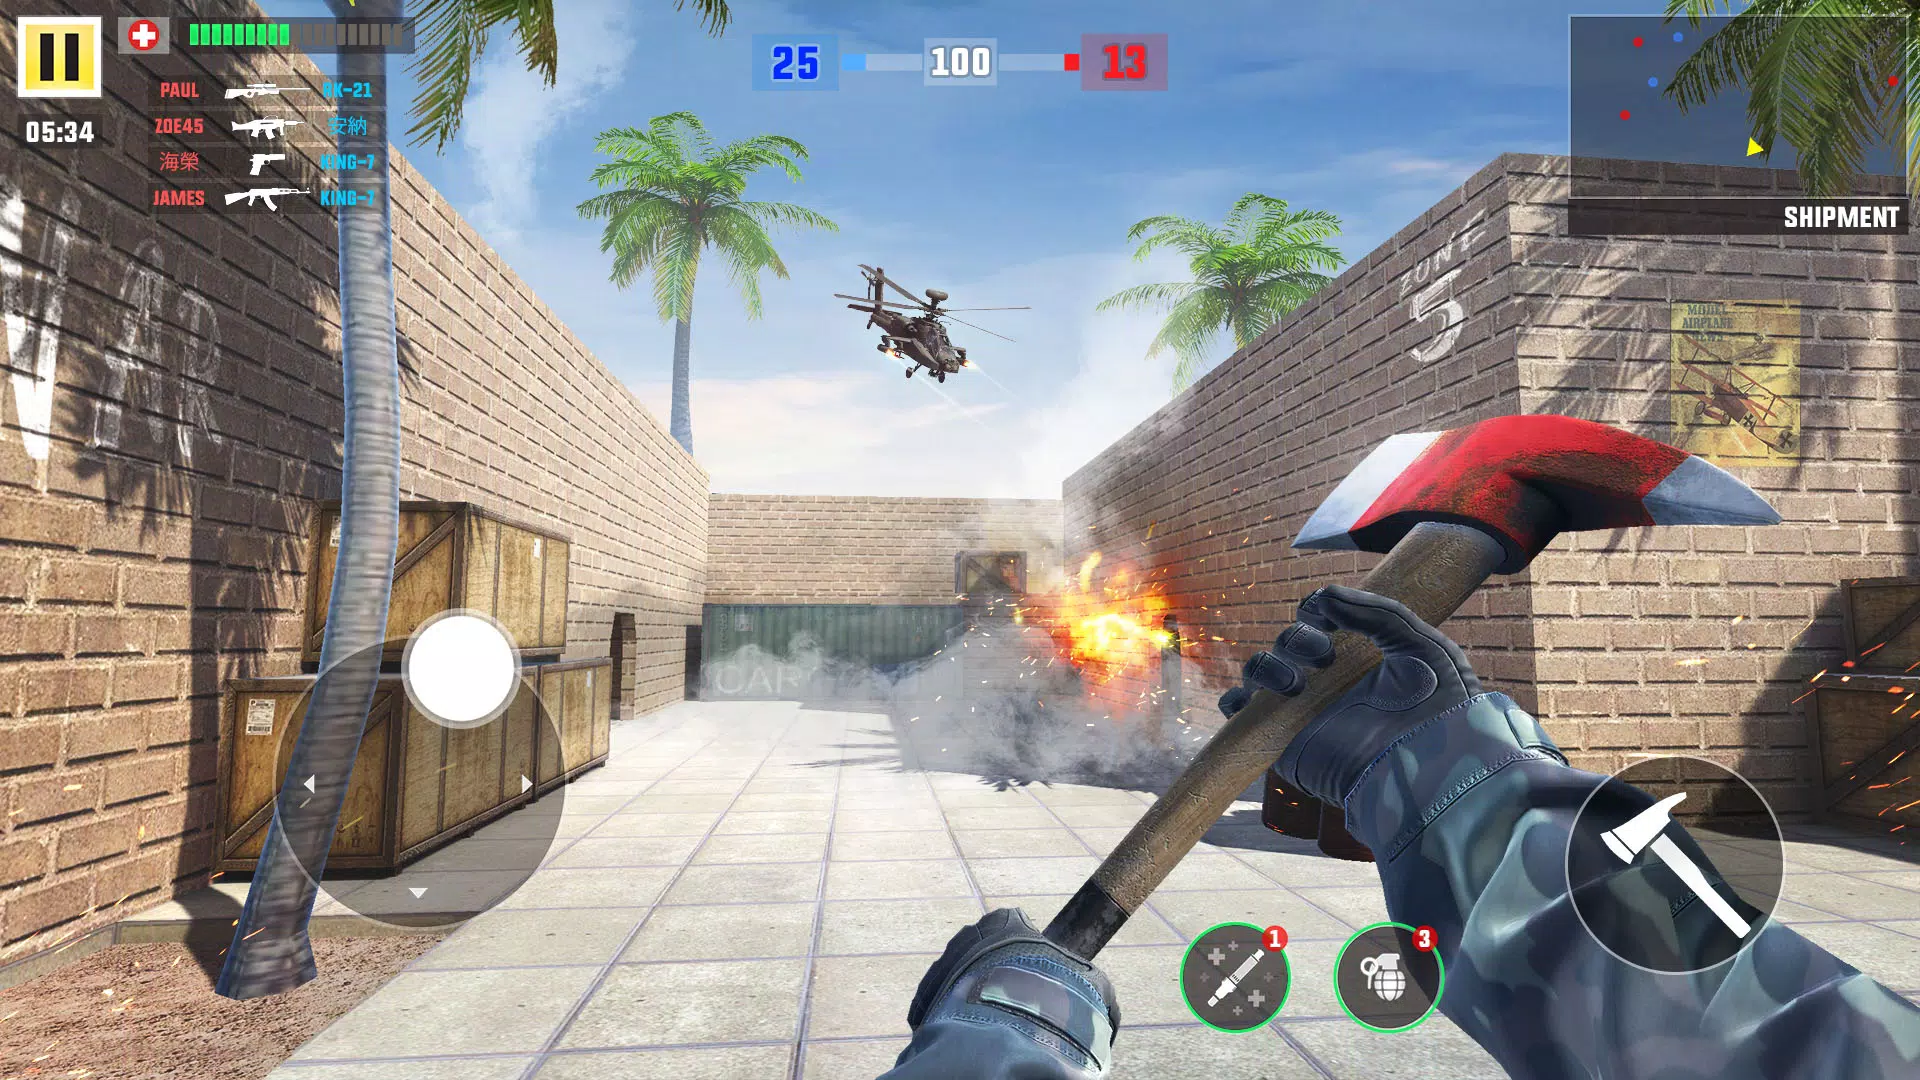 Play Free Fire - Battlegrounds Shooting Games APK for Android Download